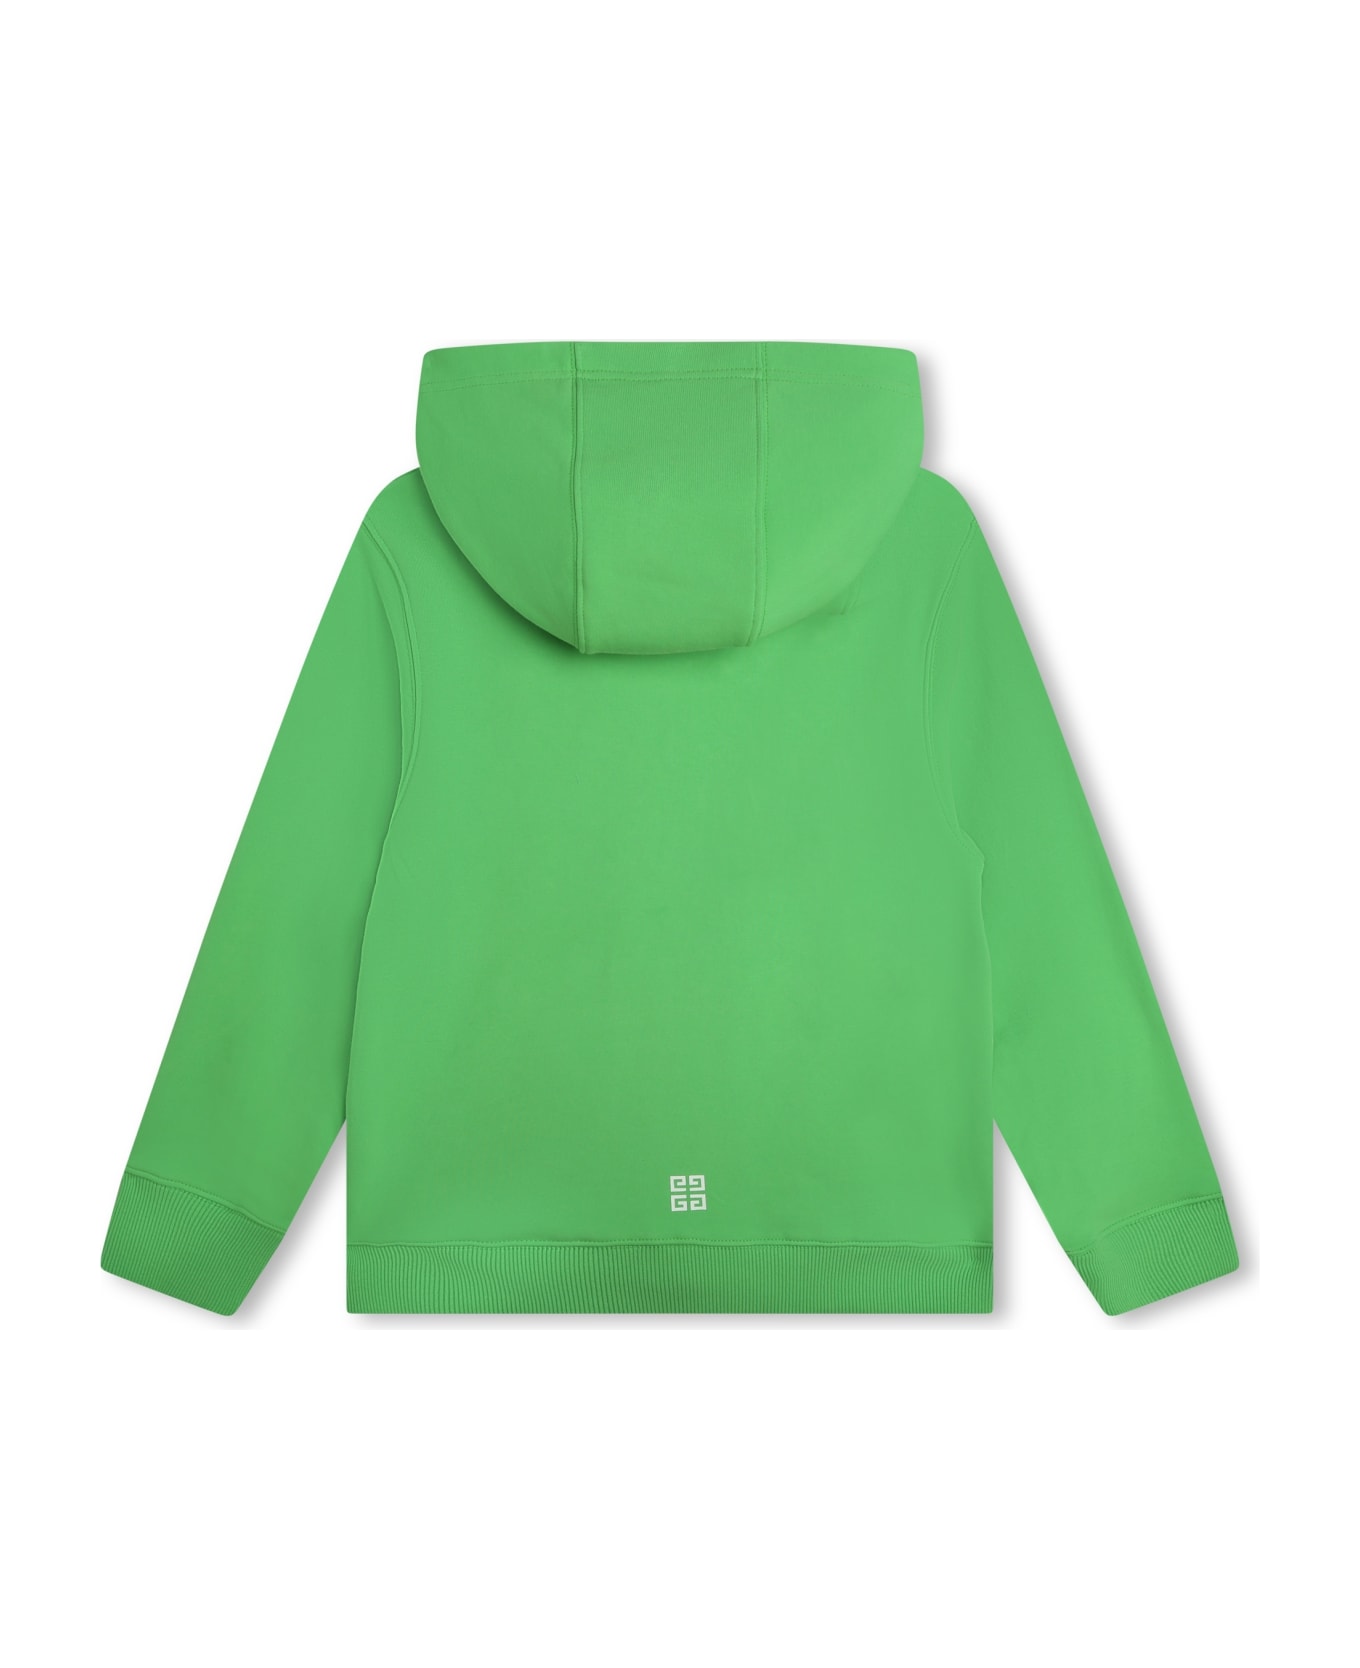 Givenchy Sweatshirt With Print - Green